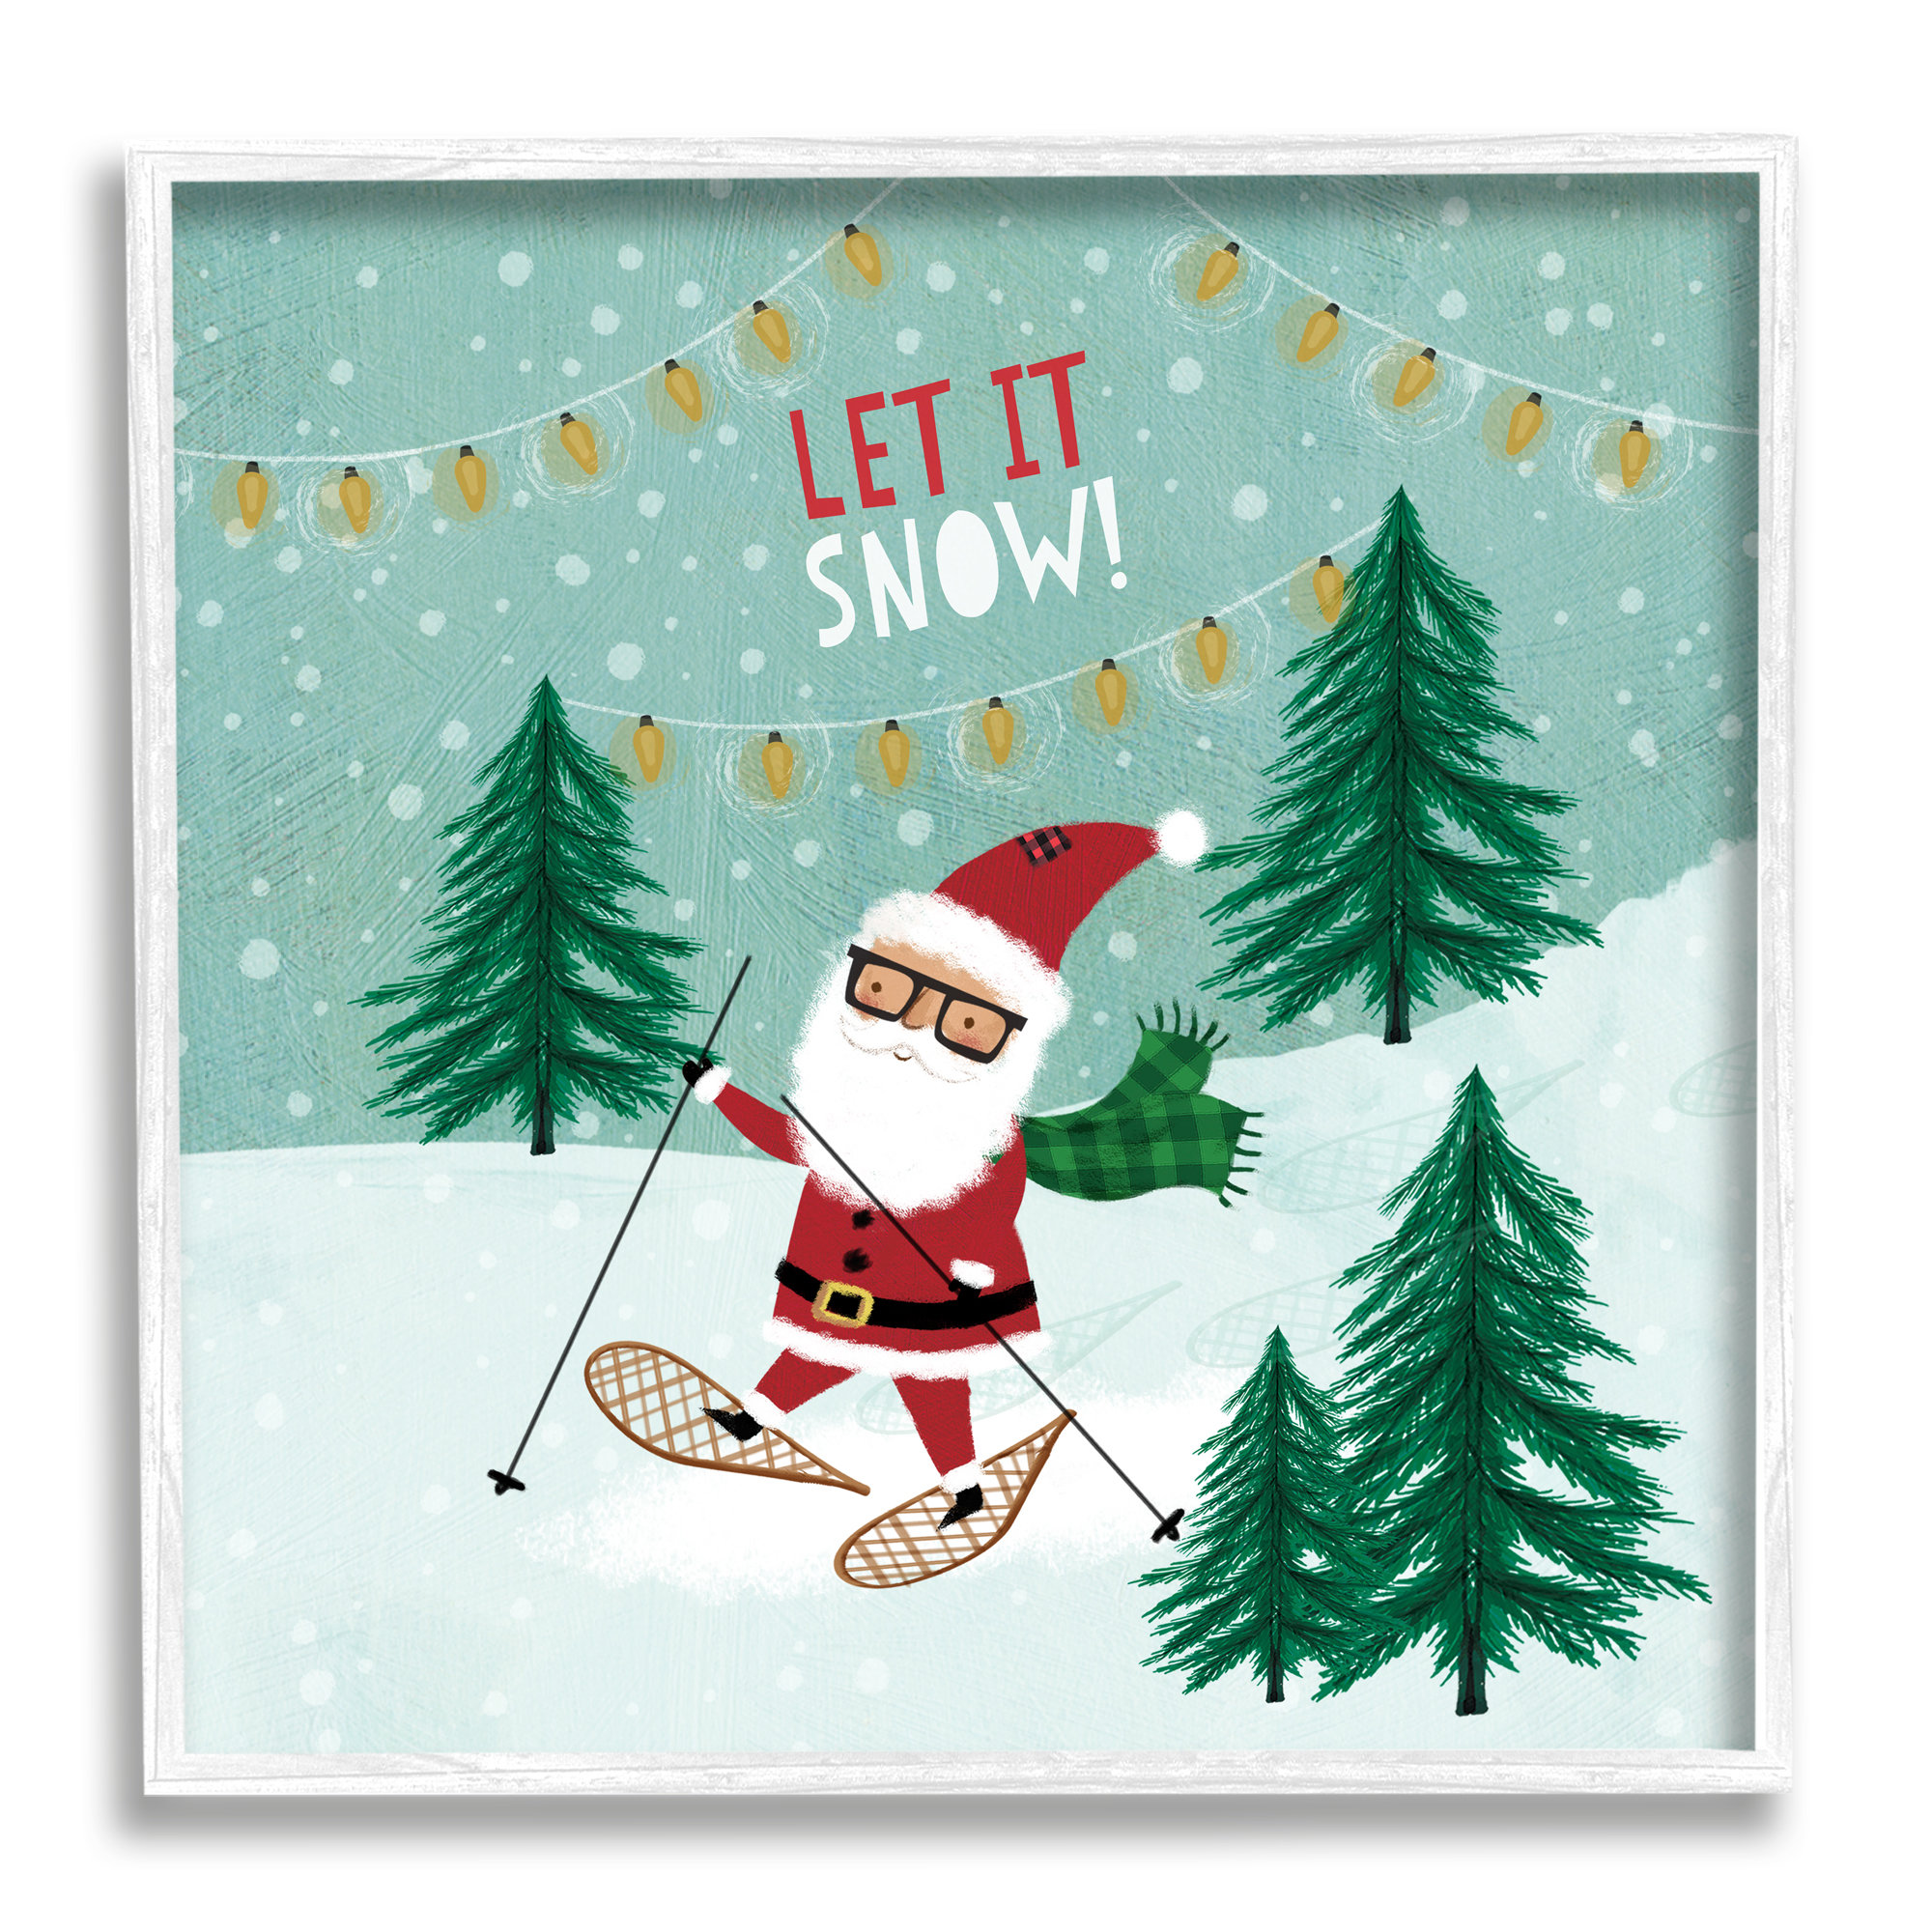 Traditional Santa Claus Christmas Card - Snowy Woodland and